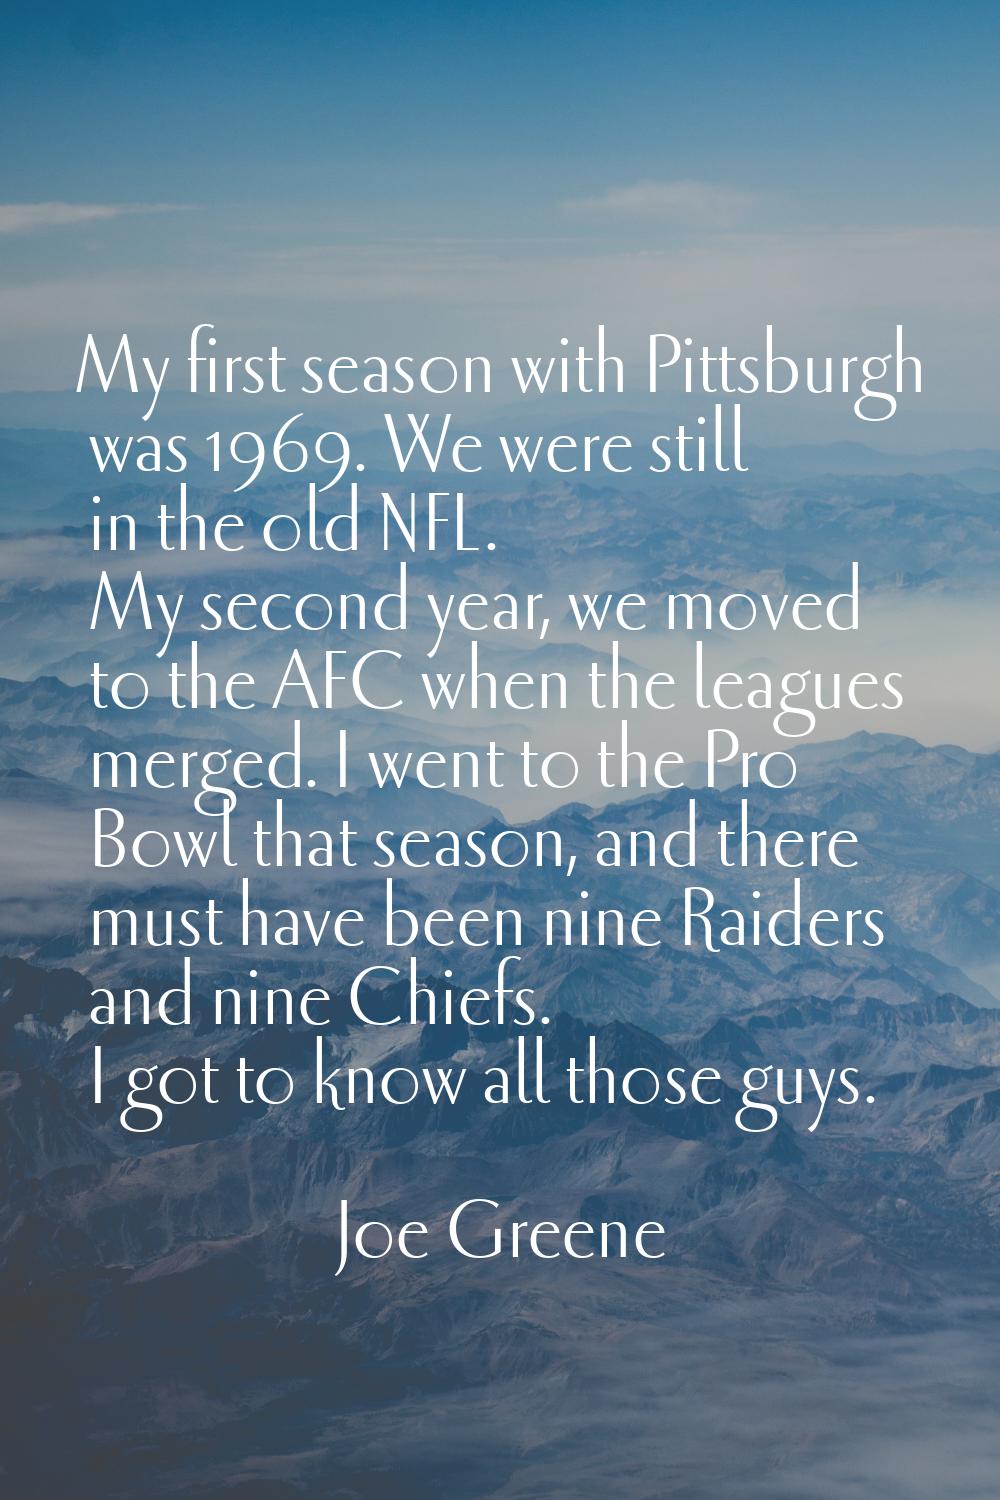 My first season with Pittsburgh was 1969. We were still in the old NFL. My second year, we moved to